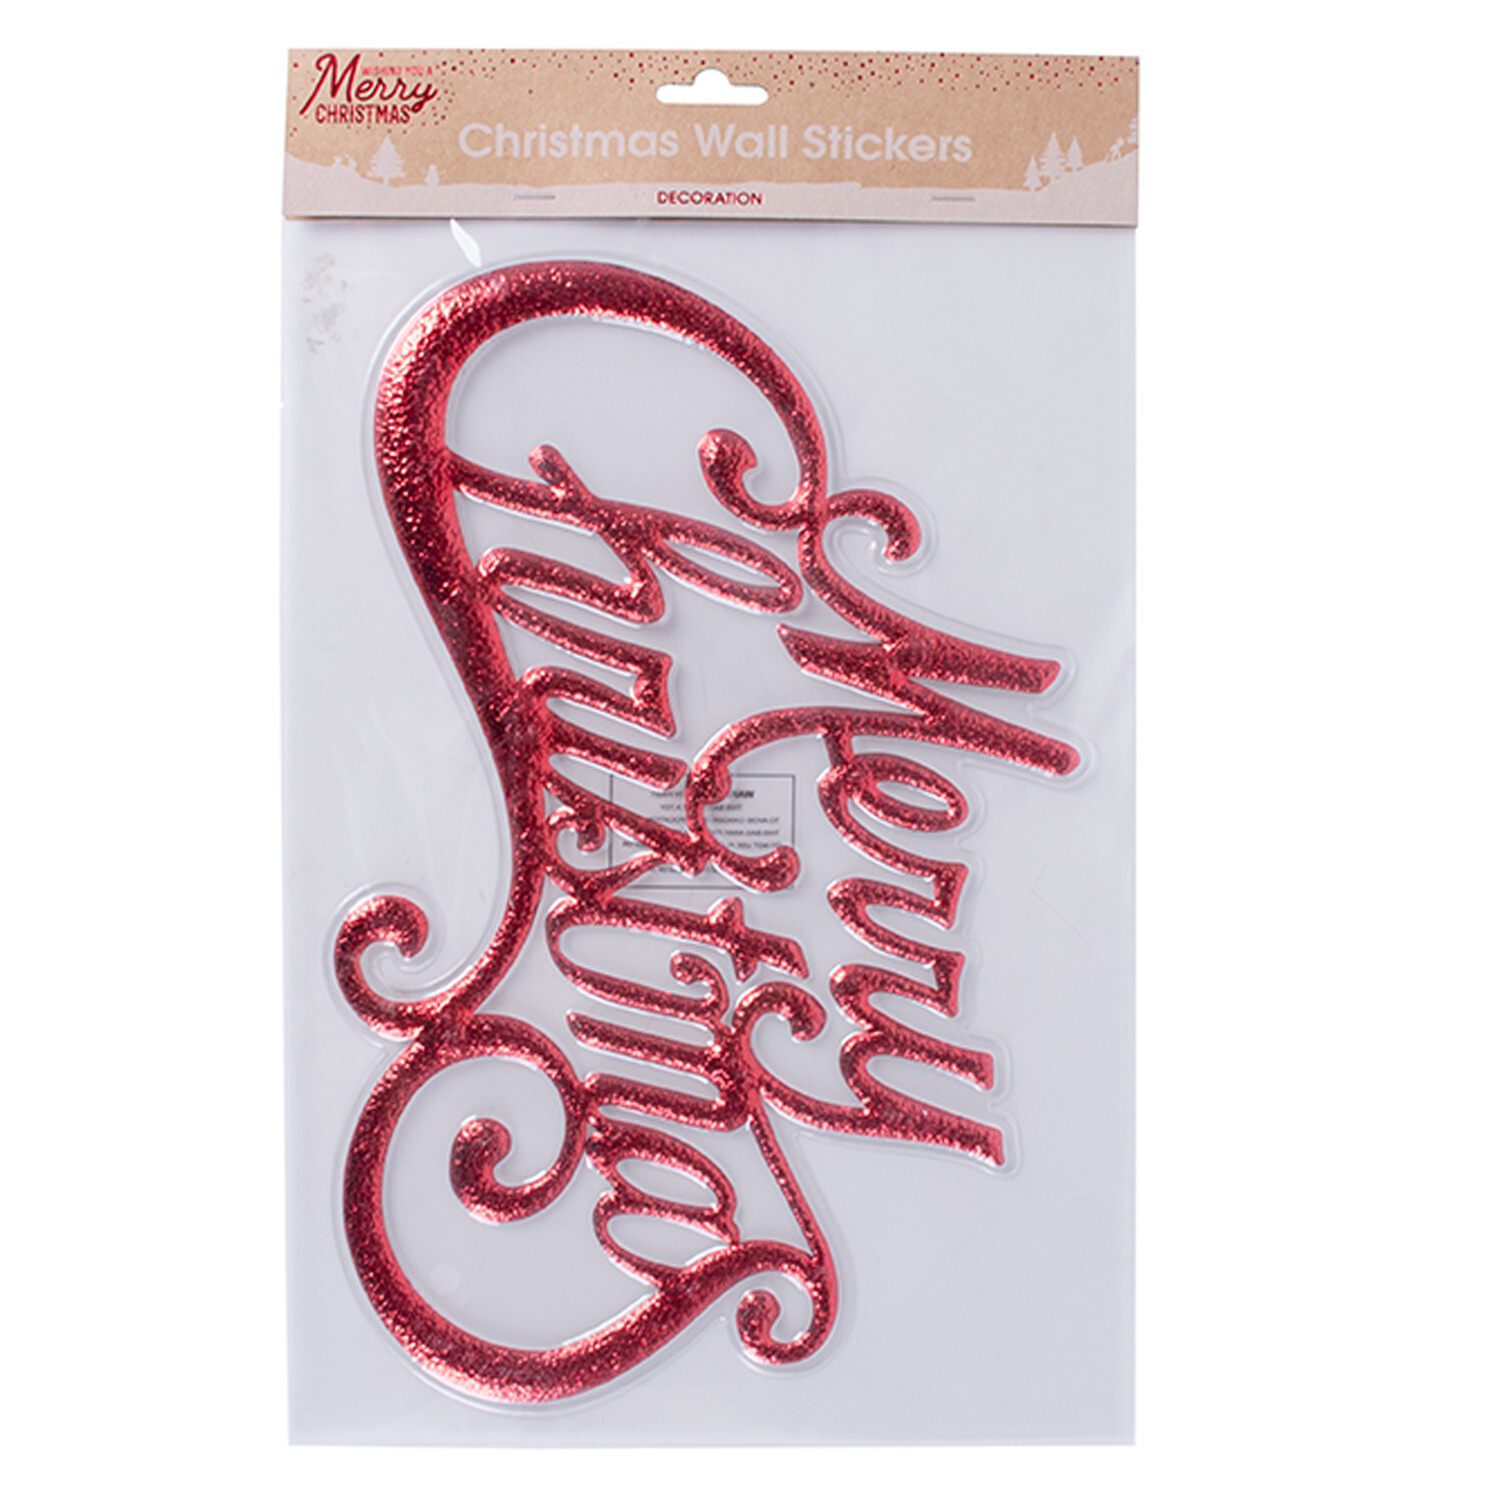 Pack of Christmas Wall Stickers Image 2